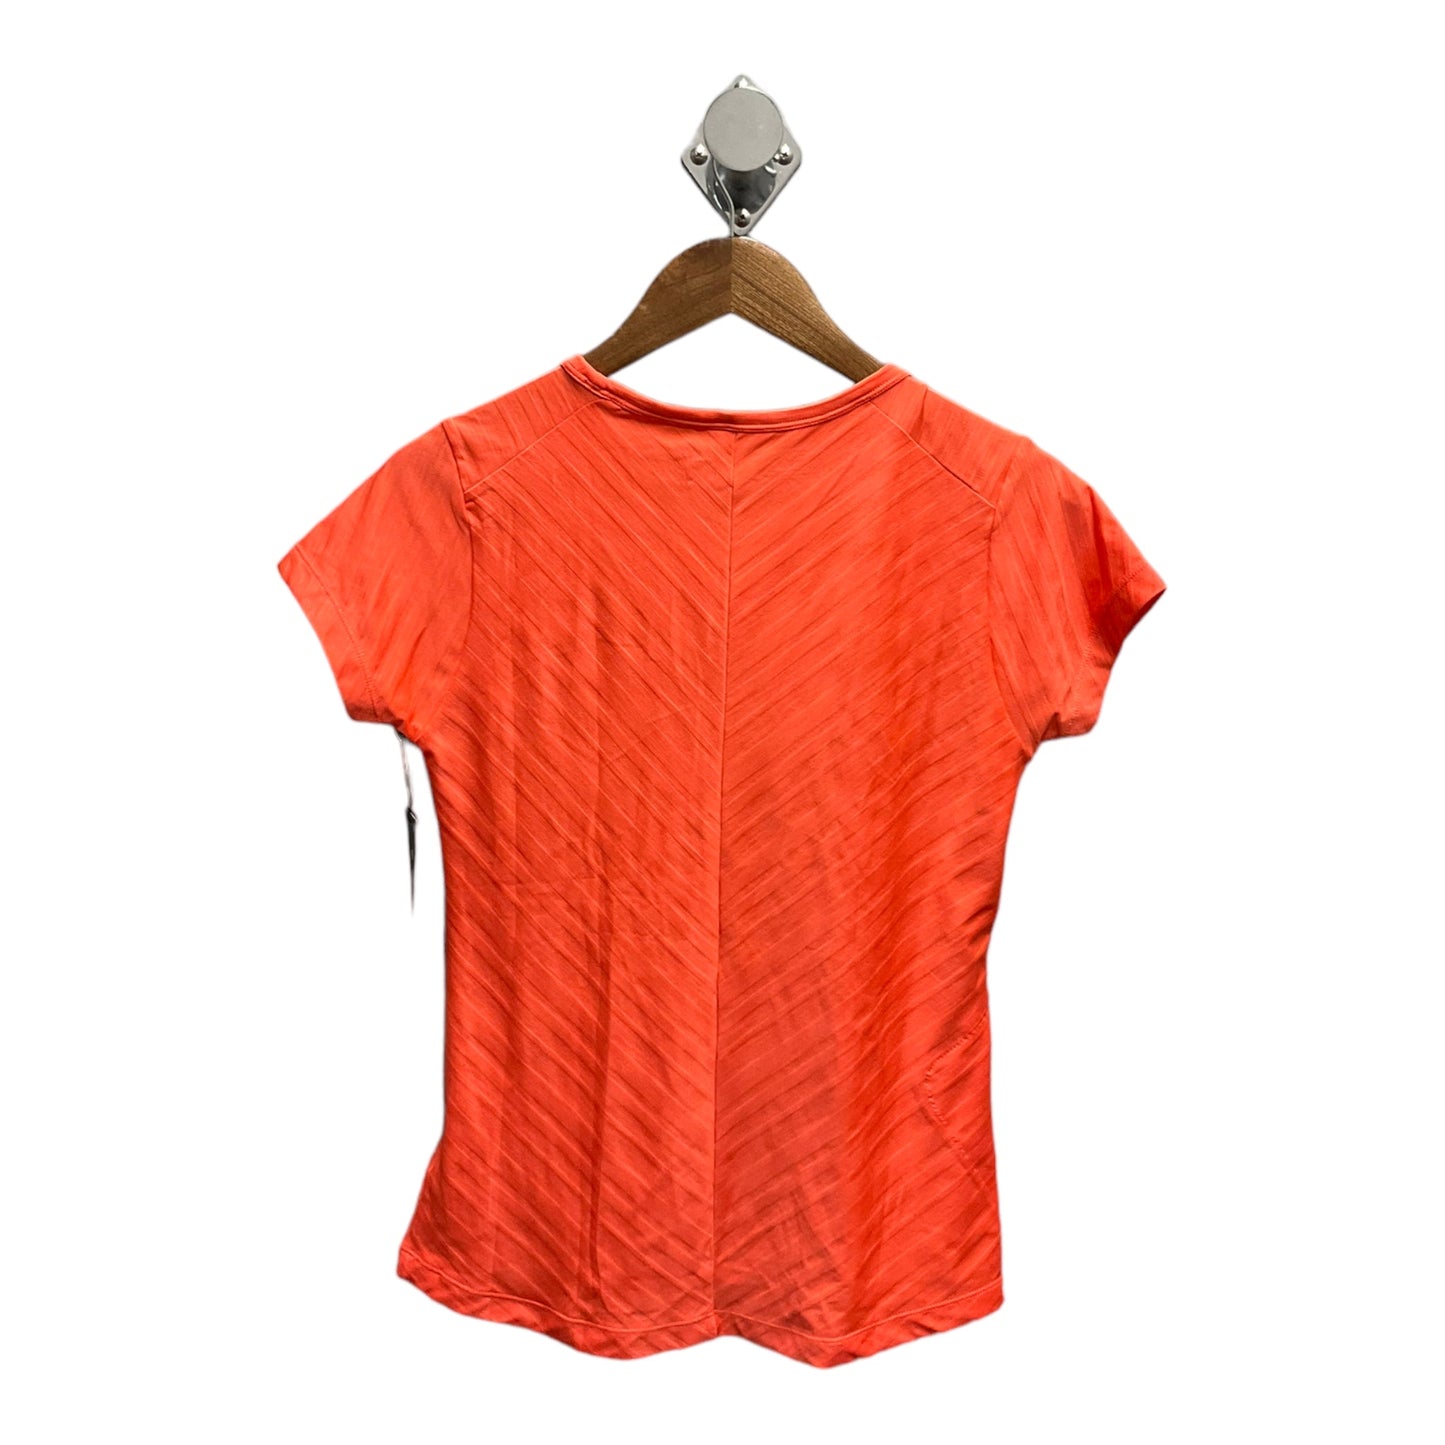 Athletic Top Short Sleeve By Mountain Hardwear  Size: Xs